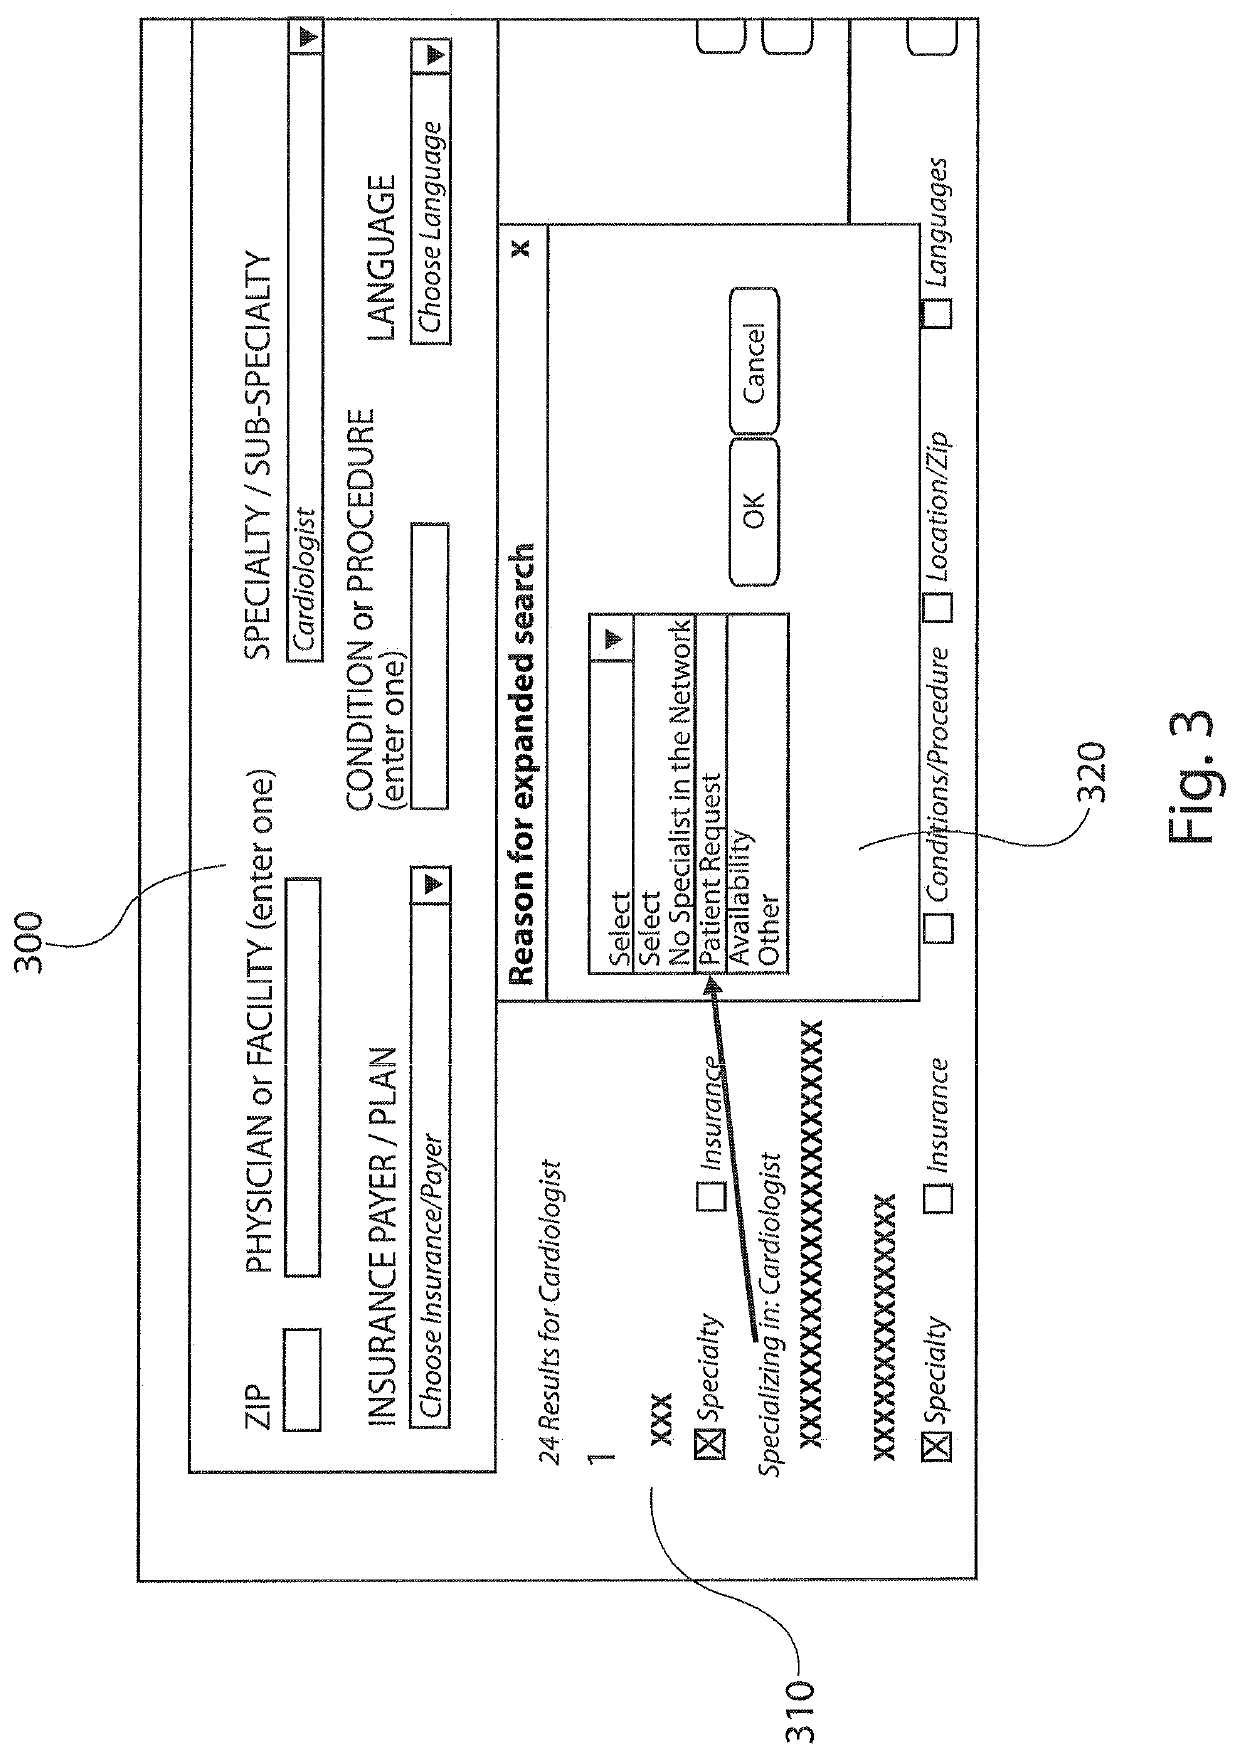 Electronic physician referral management system and methods